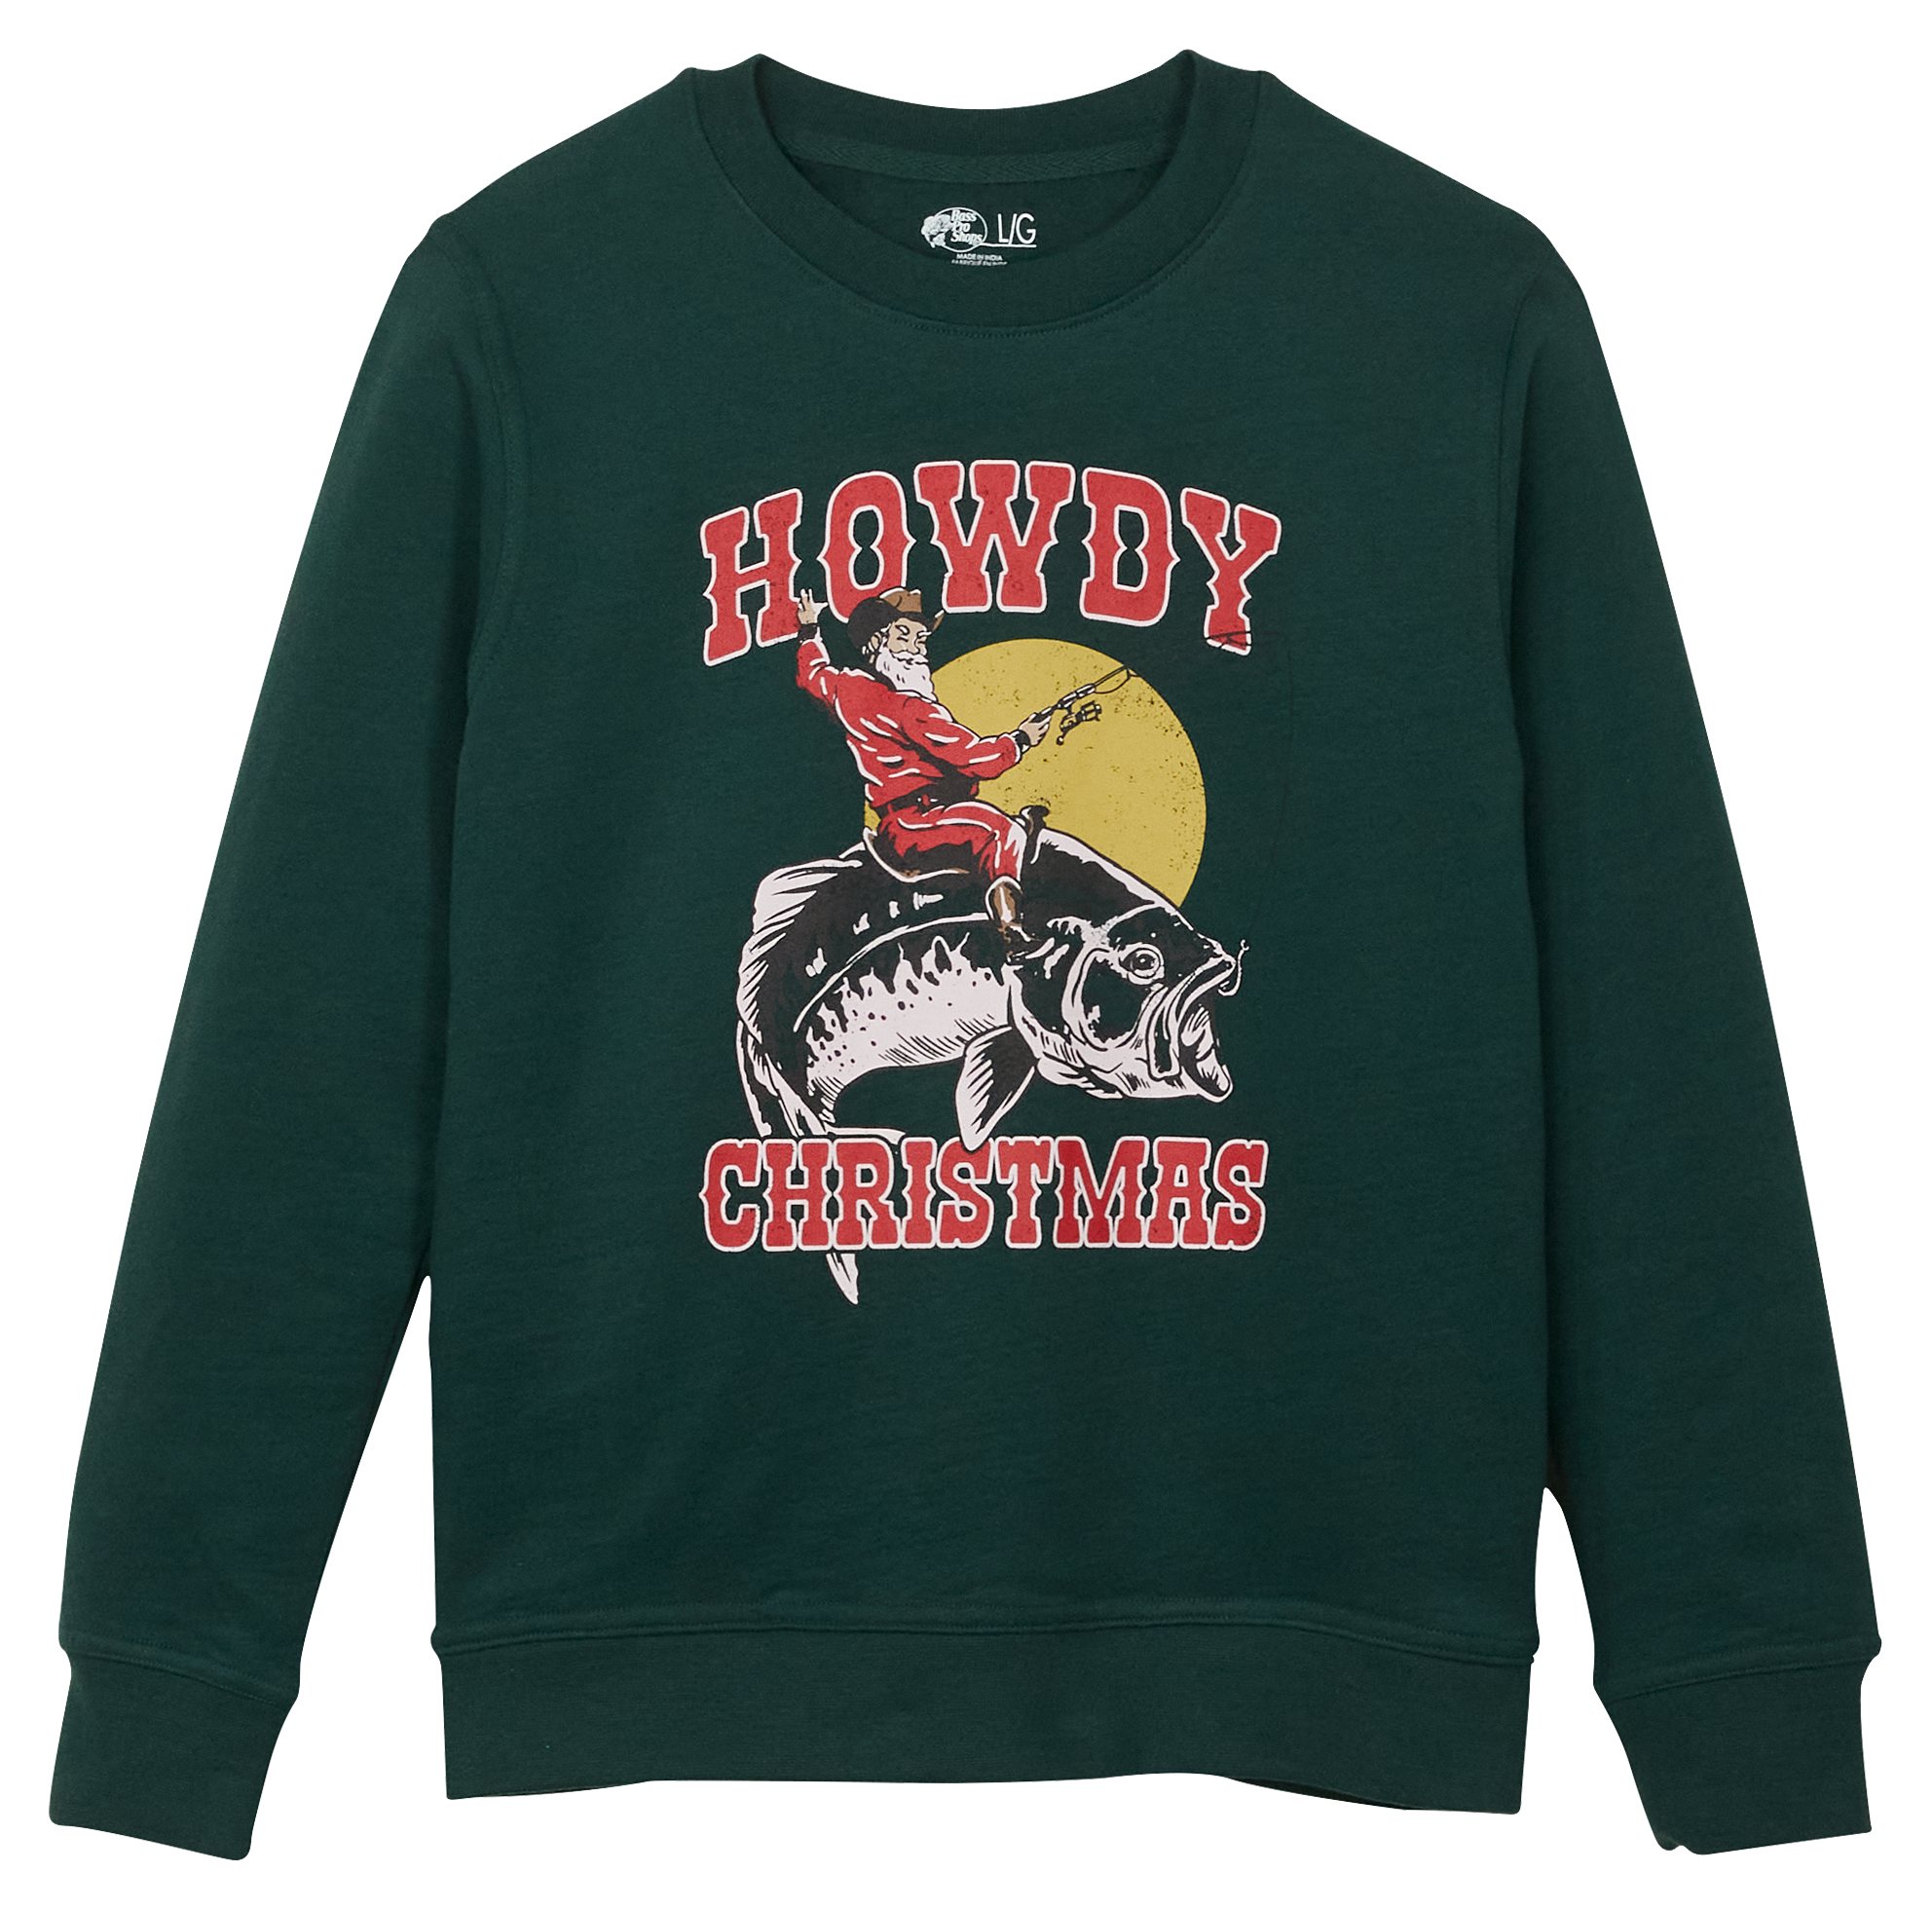 Bass Pro Shops Howdy Hunter Christmas Sweatshirt for Toddlers or Kids